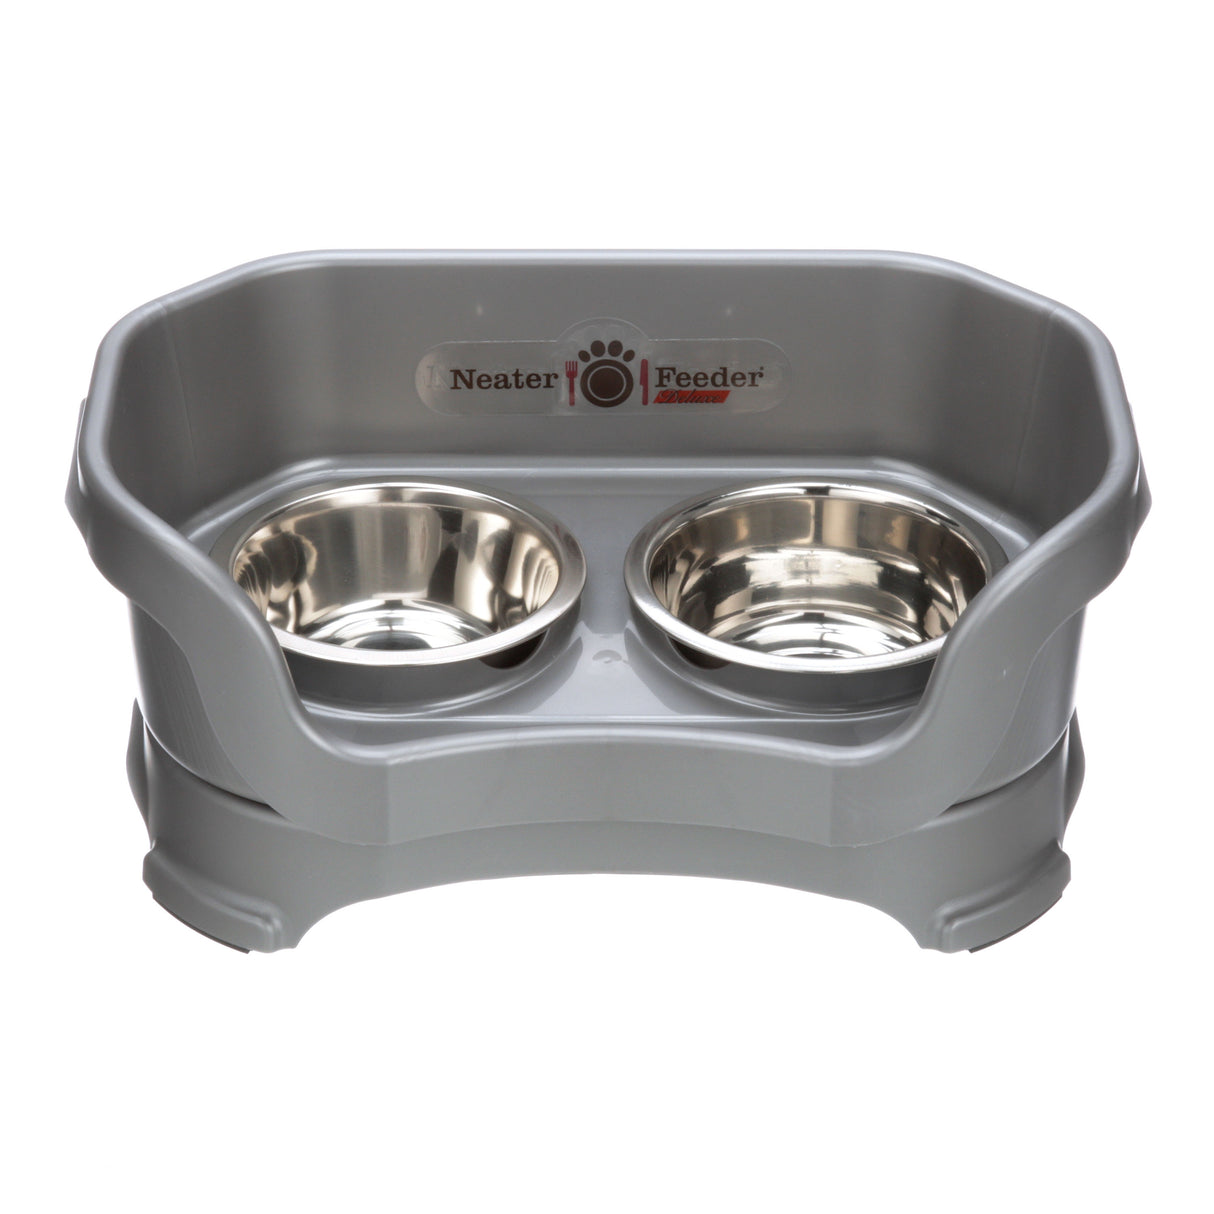 Elevated Dog Bowls, Slow Feeder Raised Dog Bowl 4 Height Adjustable No  Spill Water Bowls & Non-slip Food Bowls Stand for Small Medium Large Sized  Cats